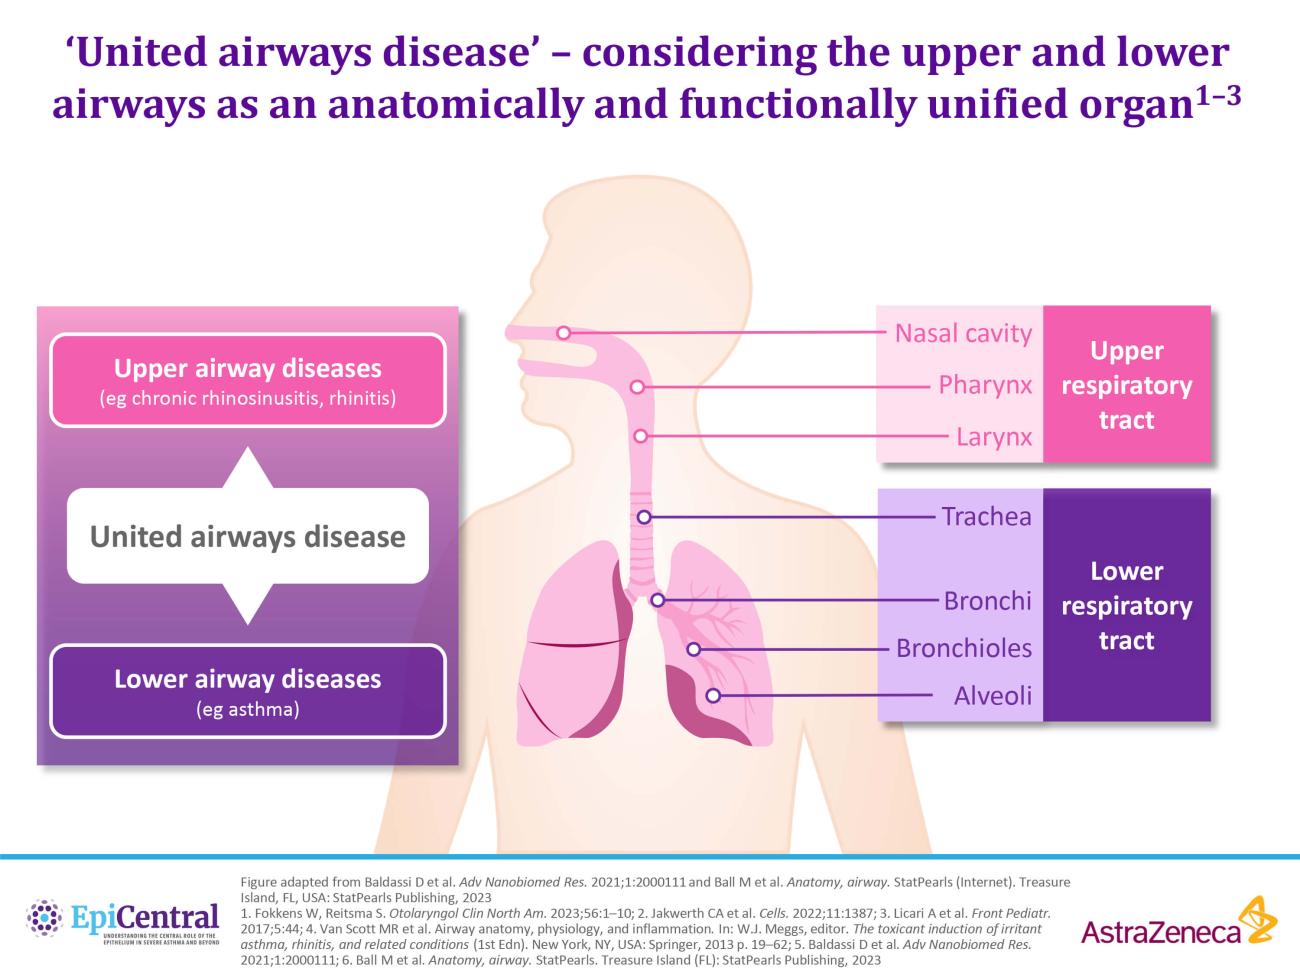 United airways disease - considering the upper and lower airways as an anatomically and functionally unified organ